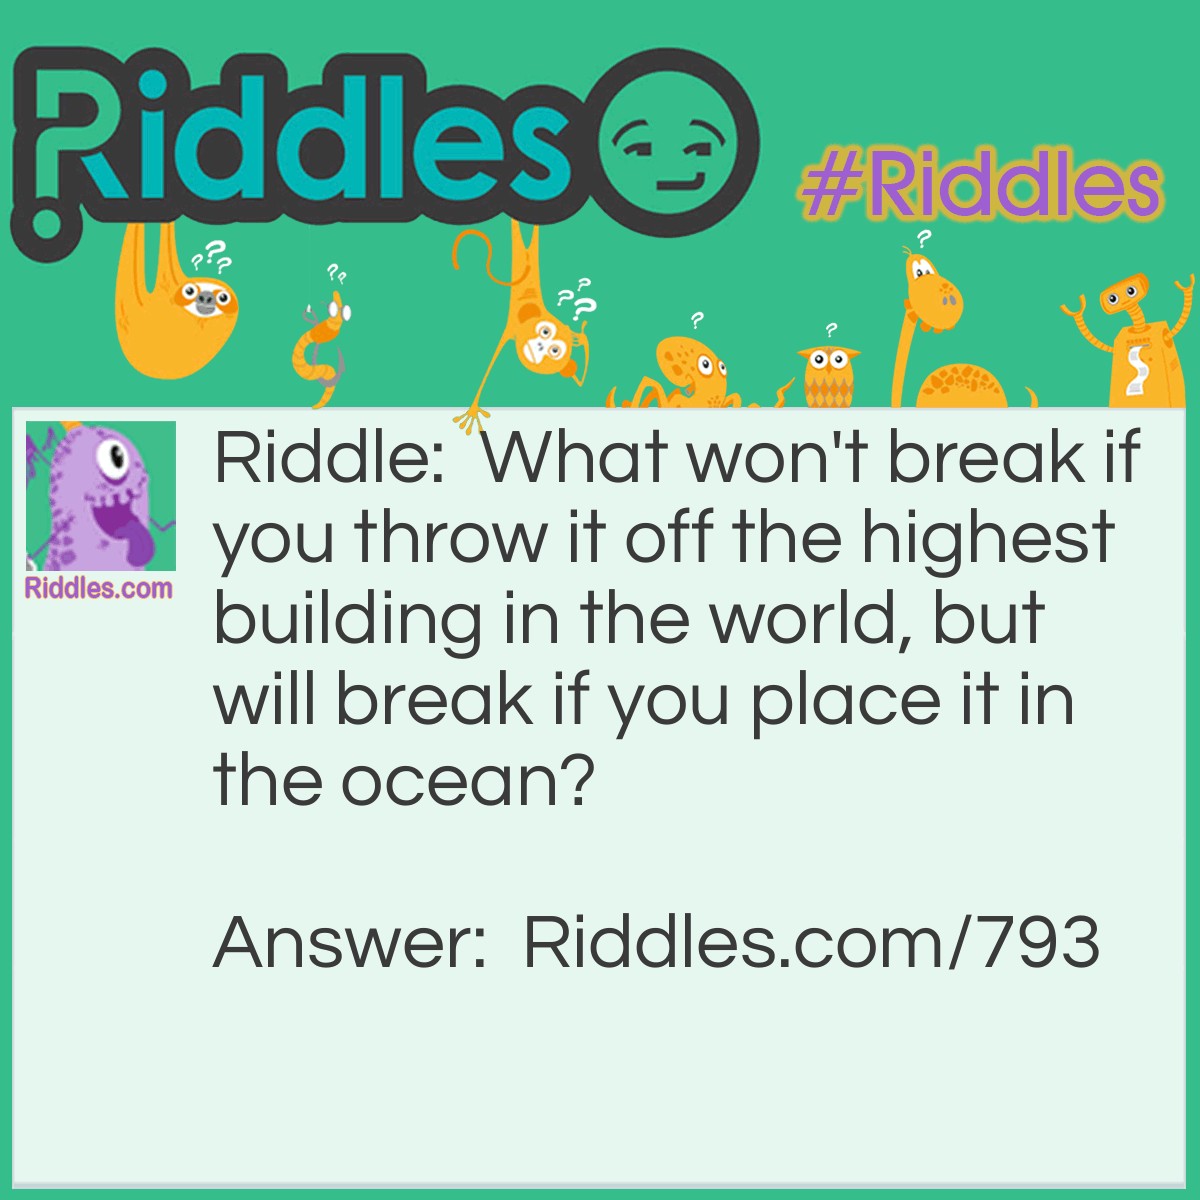 Riddle: What won't break if you throw it off the highest building in the world, but will break if you place it in the ocean? Answer: A tissue.